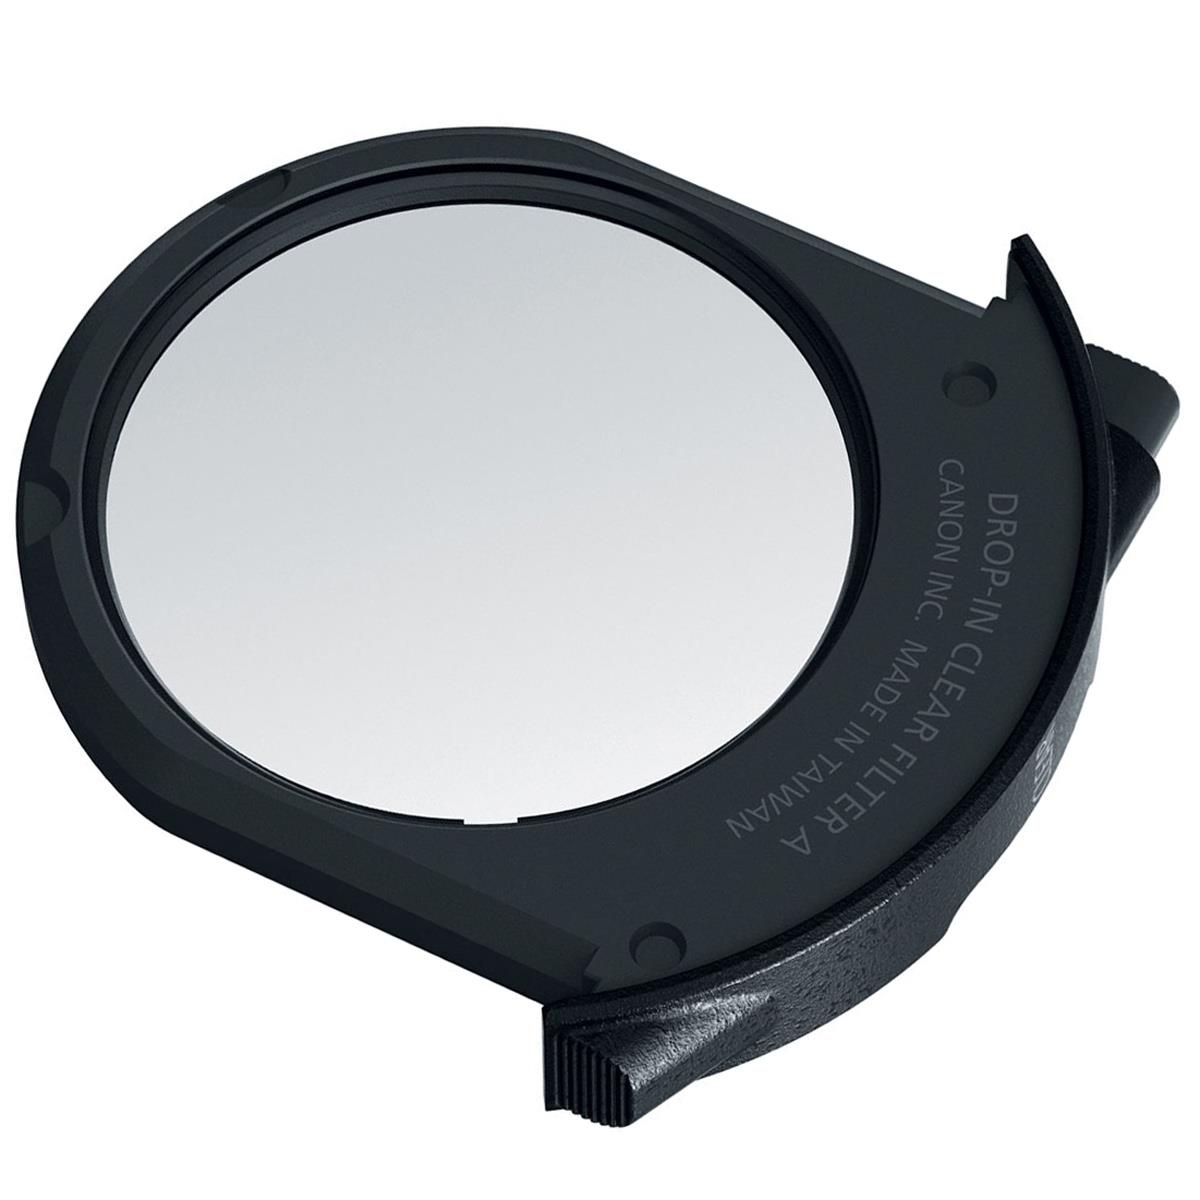 Canon Drop-In Clear Filter A for EF-EOS R Mount Adapter viltrox ef to r2 lens adapter ring with functional control auto focus ring for canon ef ef s lenses to canon eos r mount camera